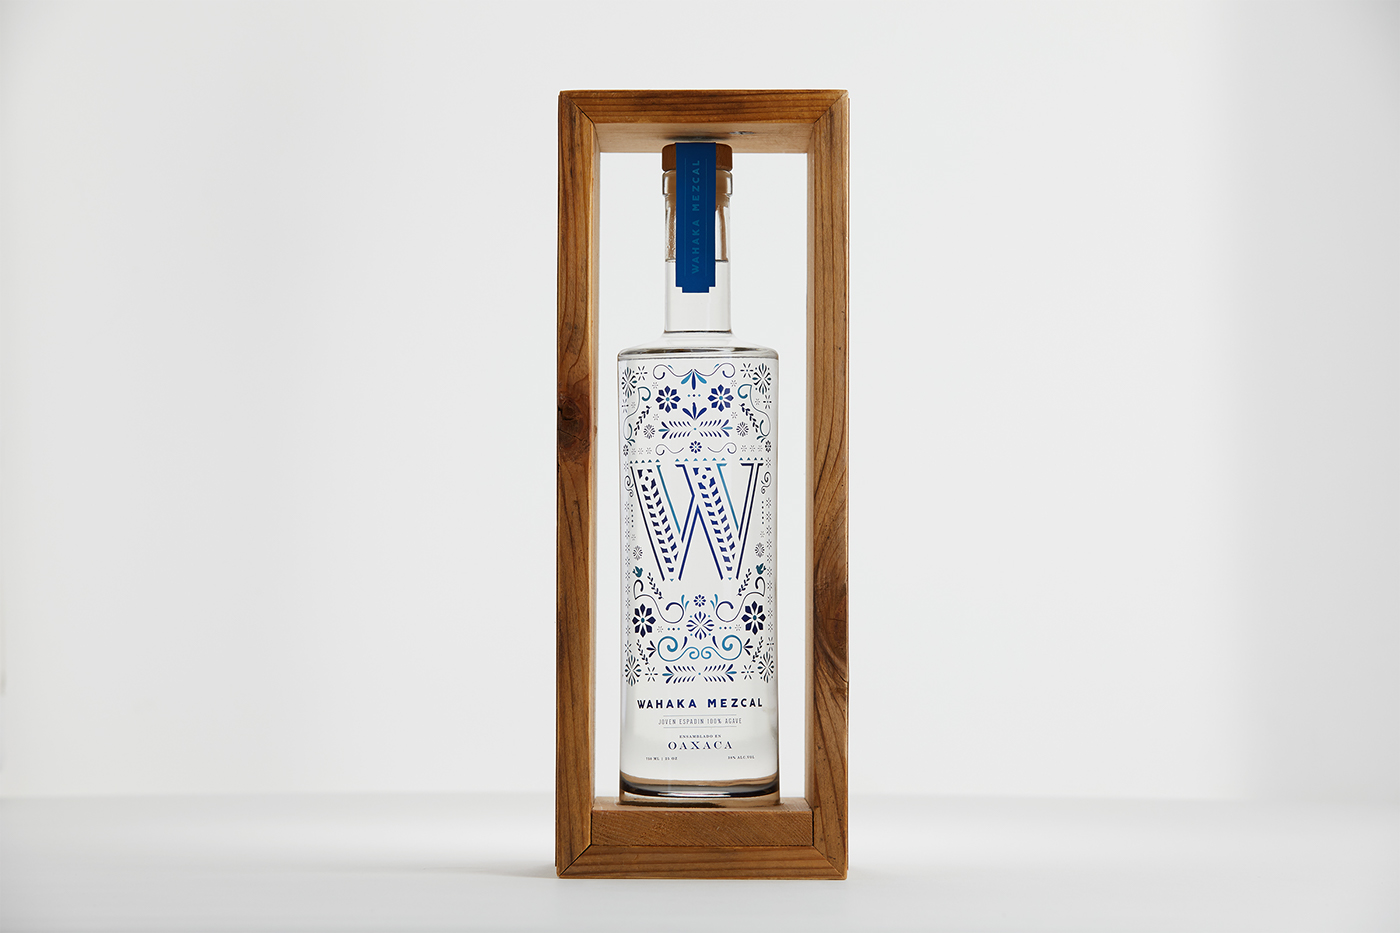 mezcal pattern mexico culture Packaging Label blue Tequila logo vector